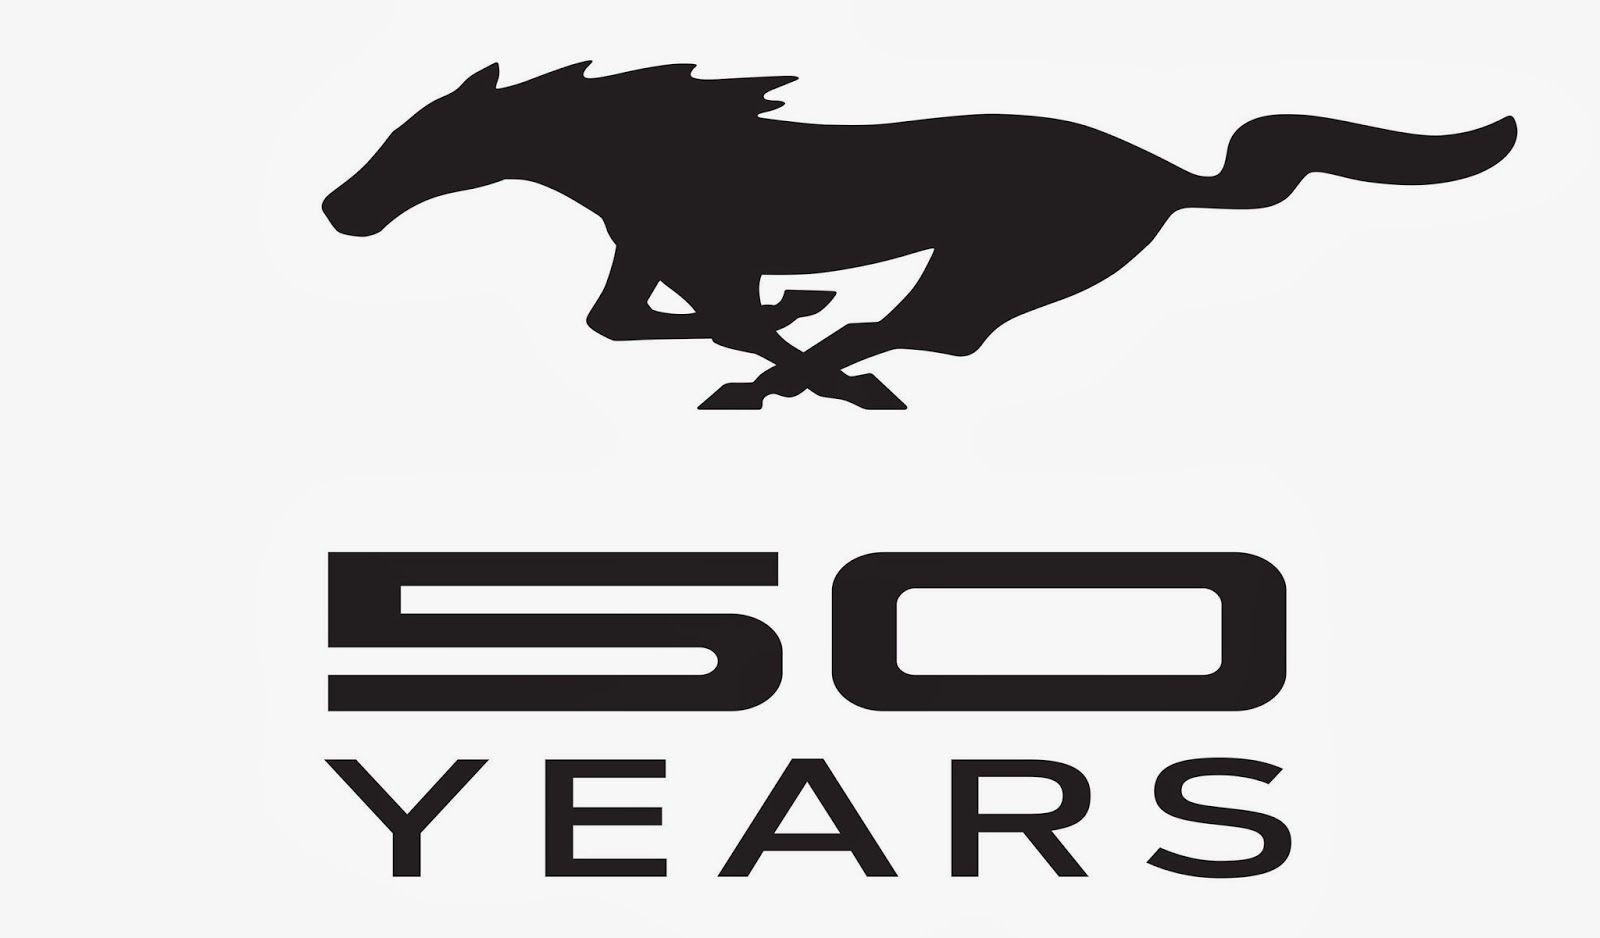 Ford Mustang 50th Anniversary Logo - North Brothers Chronicle: 50 Years of Ford Mustang Milestones